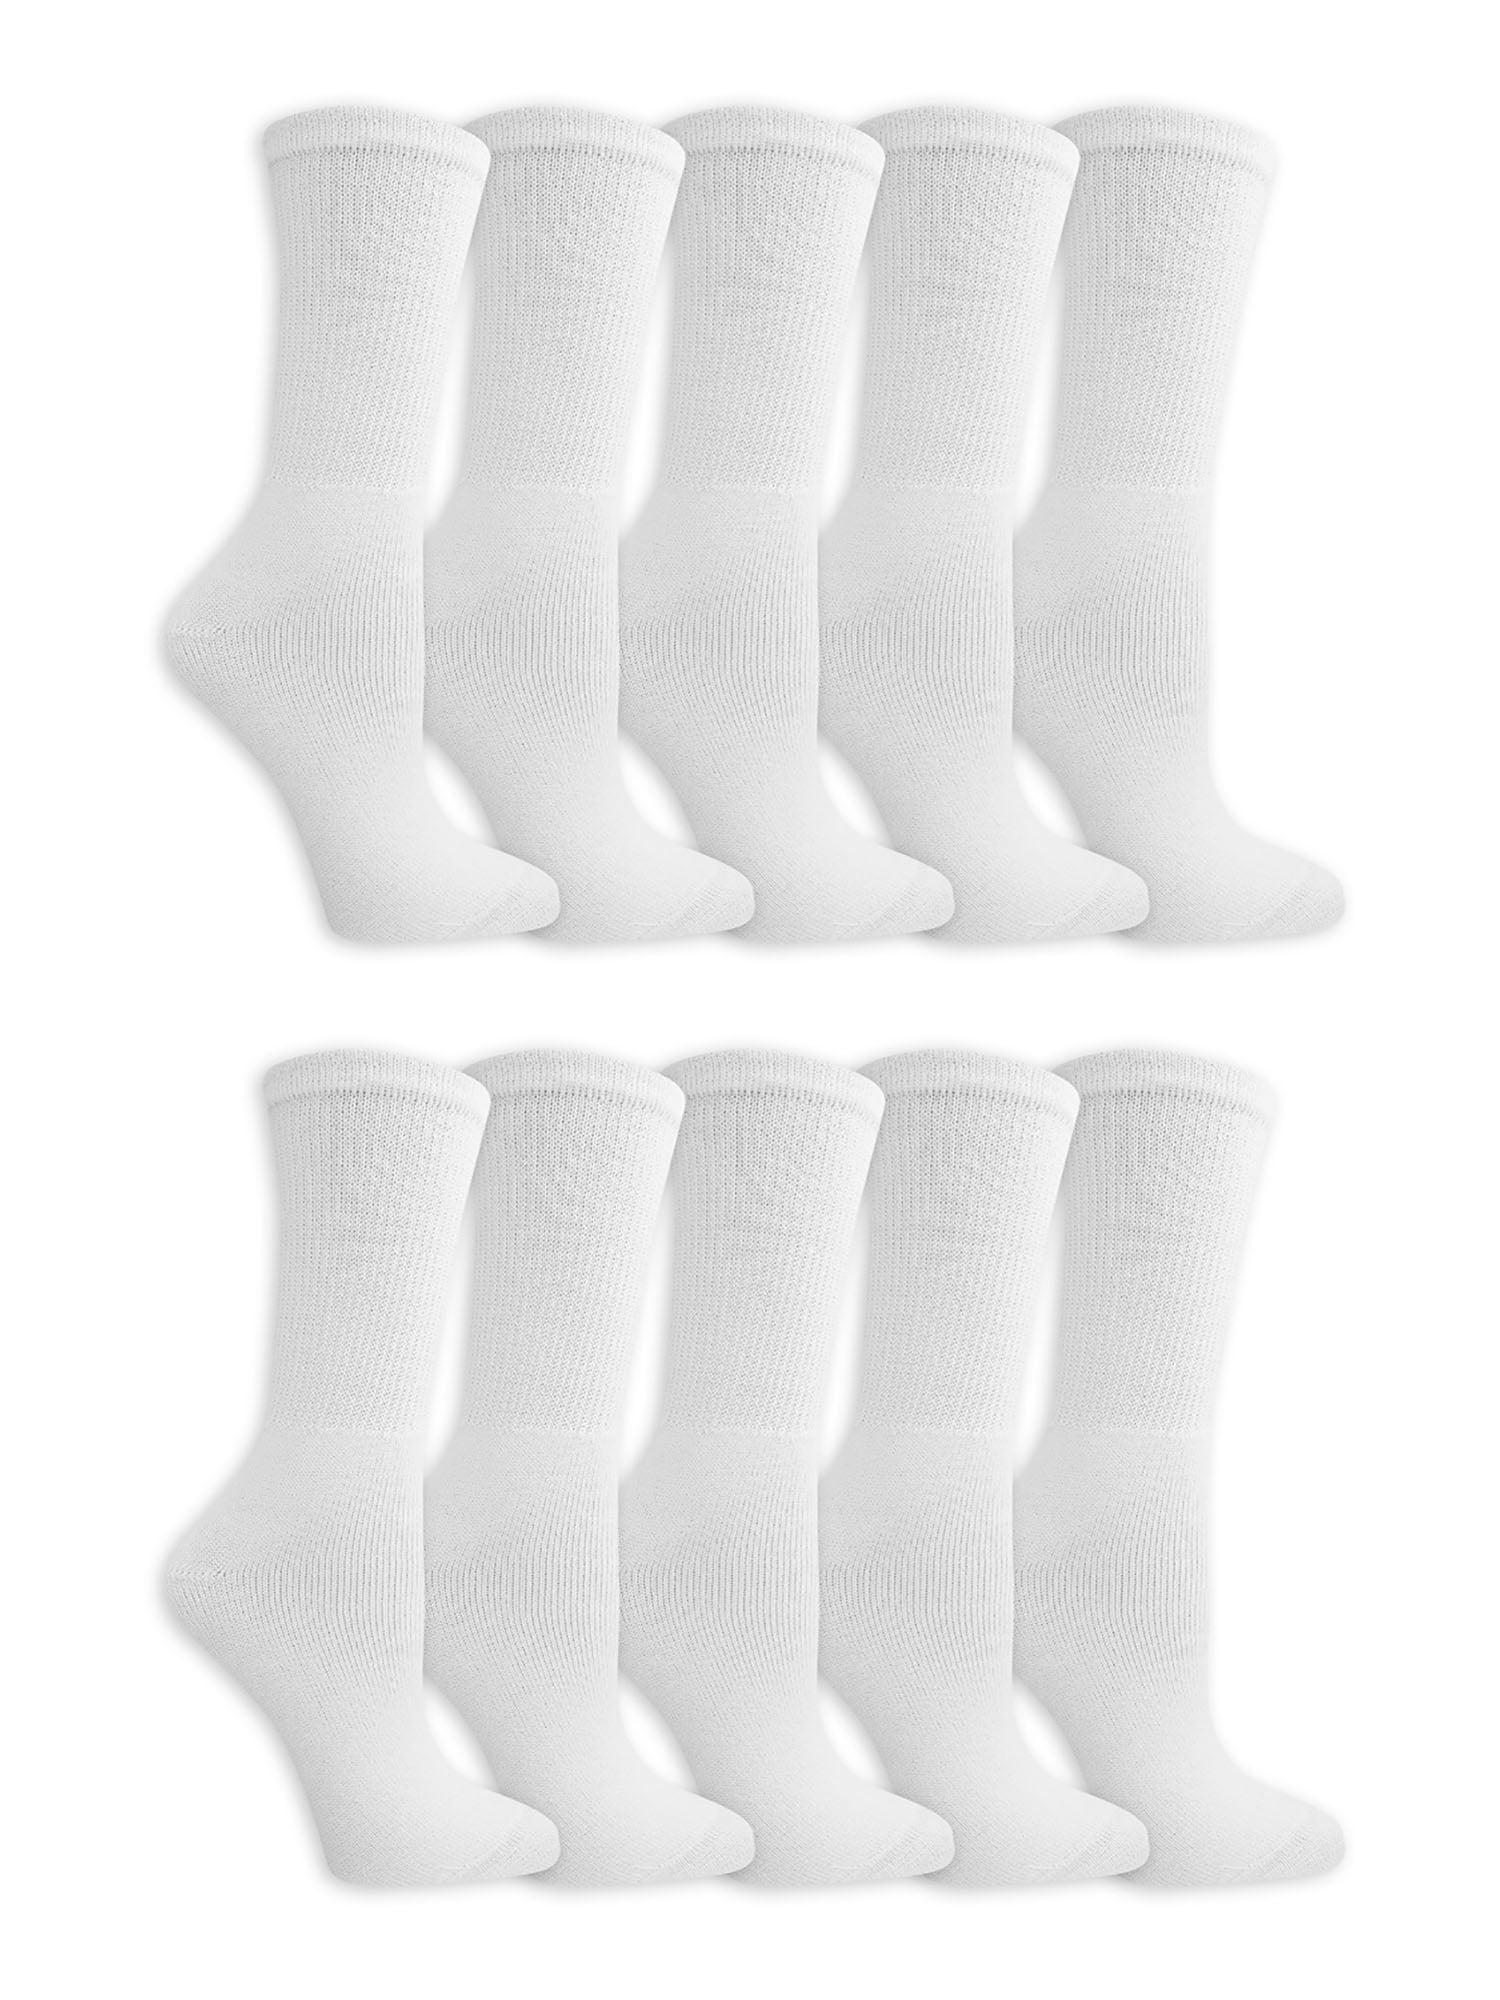 SOFTGAS Women Athletic Socks, 5 Pairs each Pack Soft Breathable